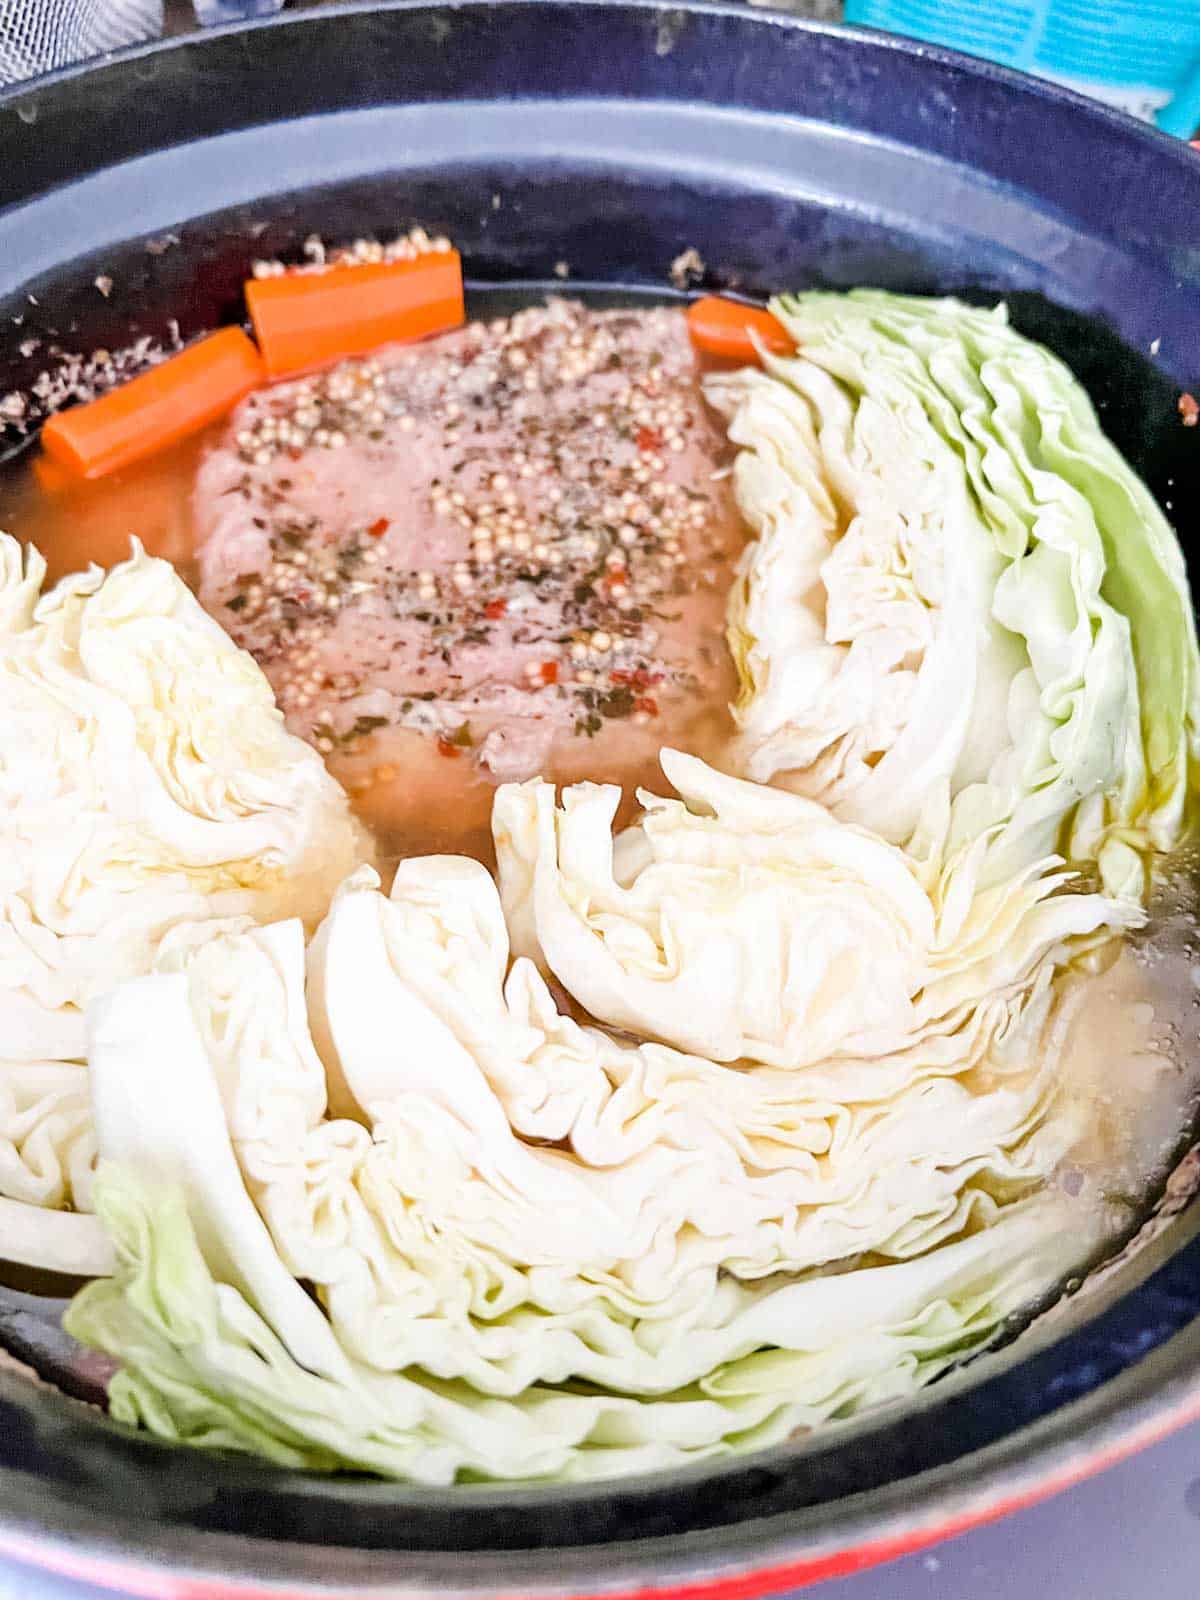 Photo of corned beef and cabbage in and Instant pot Dutch Oven.